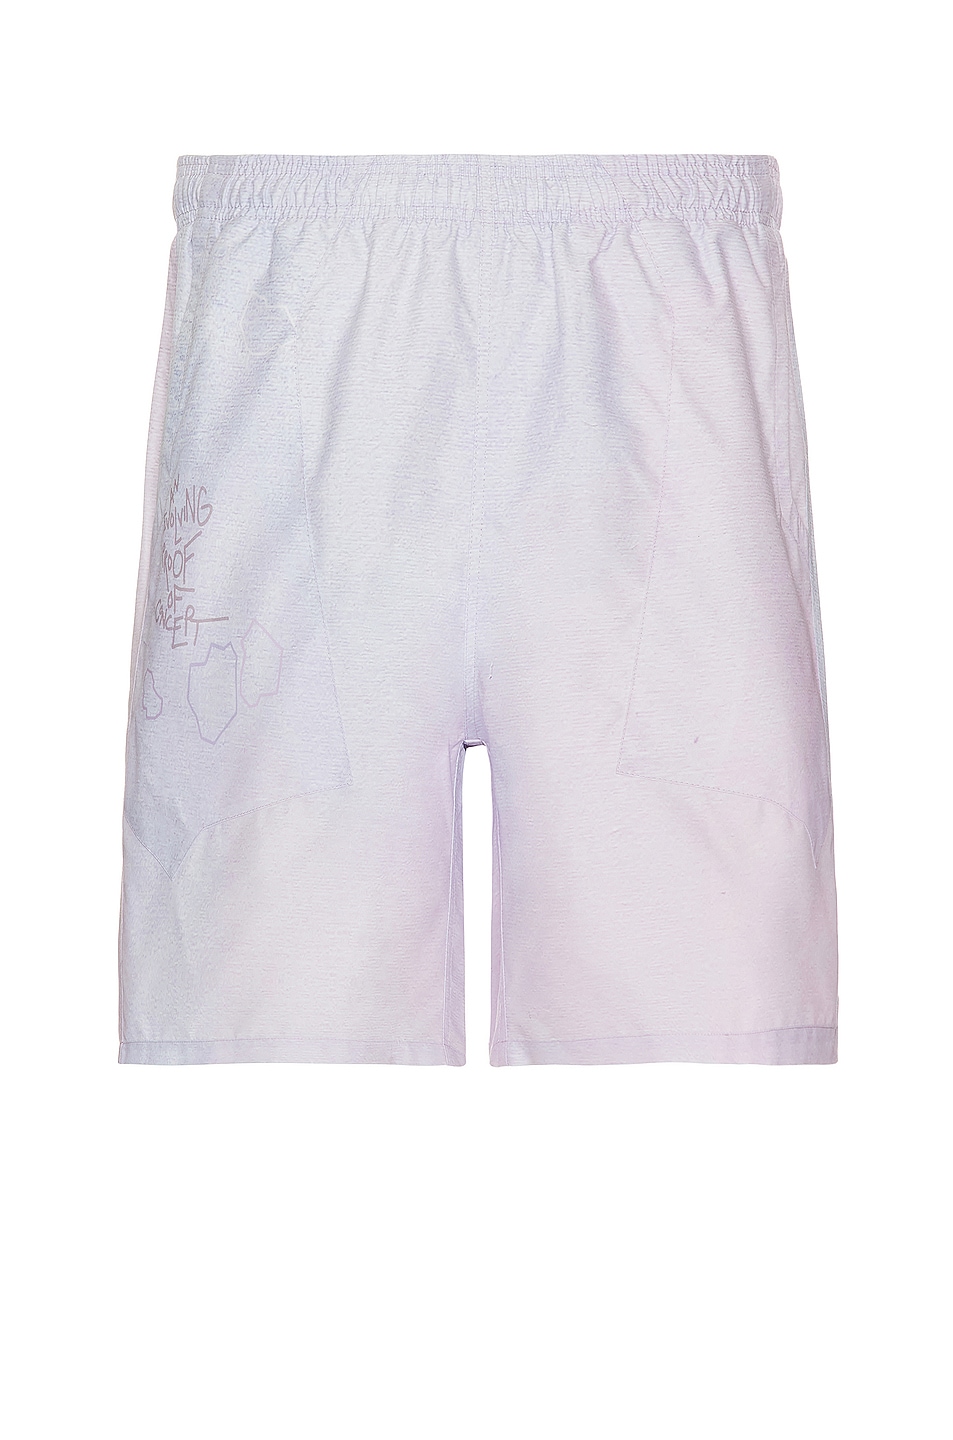 Image 1 of Objects IV Life Swimming Shorts in Lilac Fade